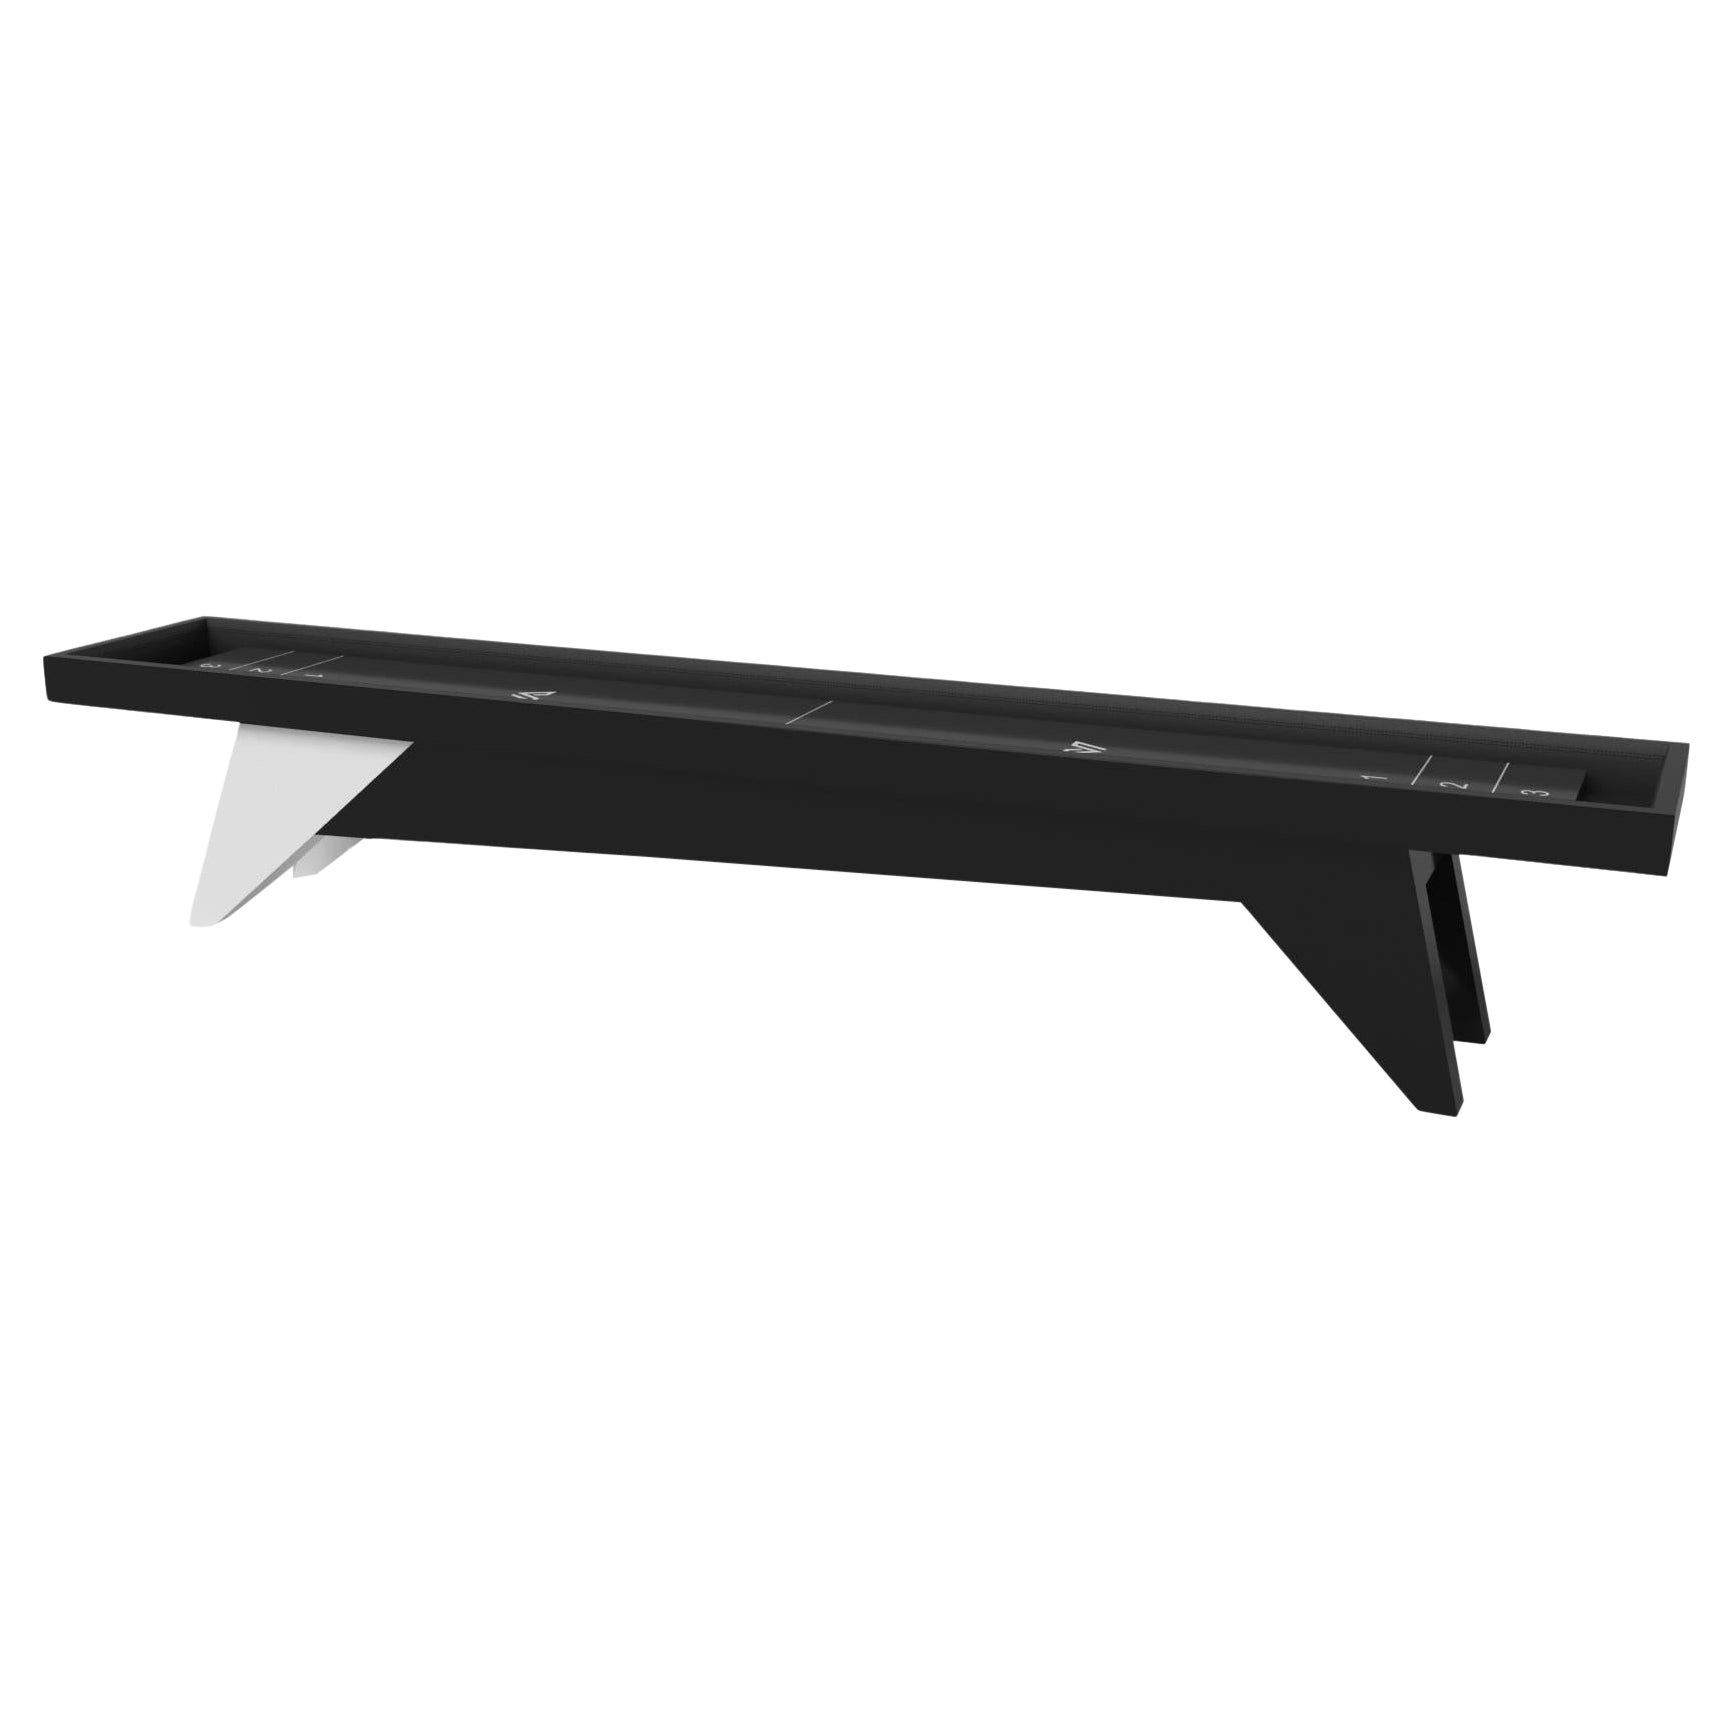 Elevate Customs Mantis Shuffleboard Tables /Solid Pantone Black Color in 22'-USA For Sale